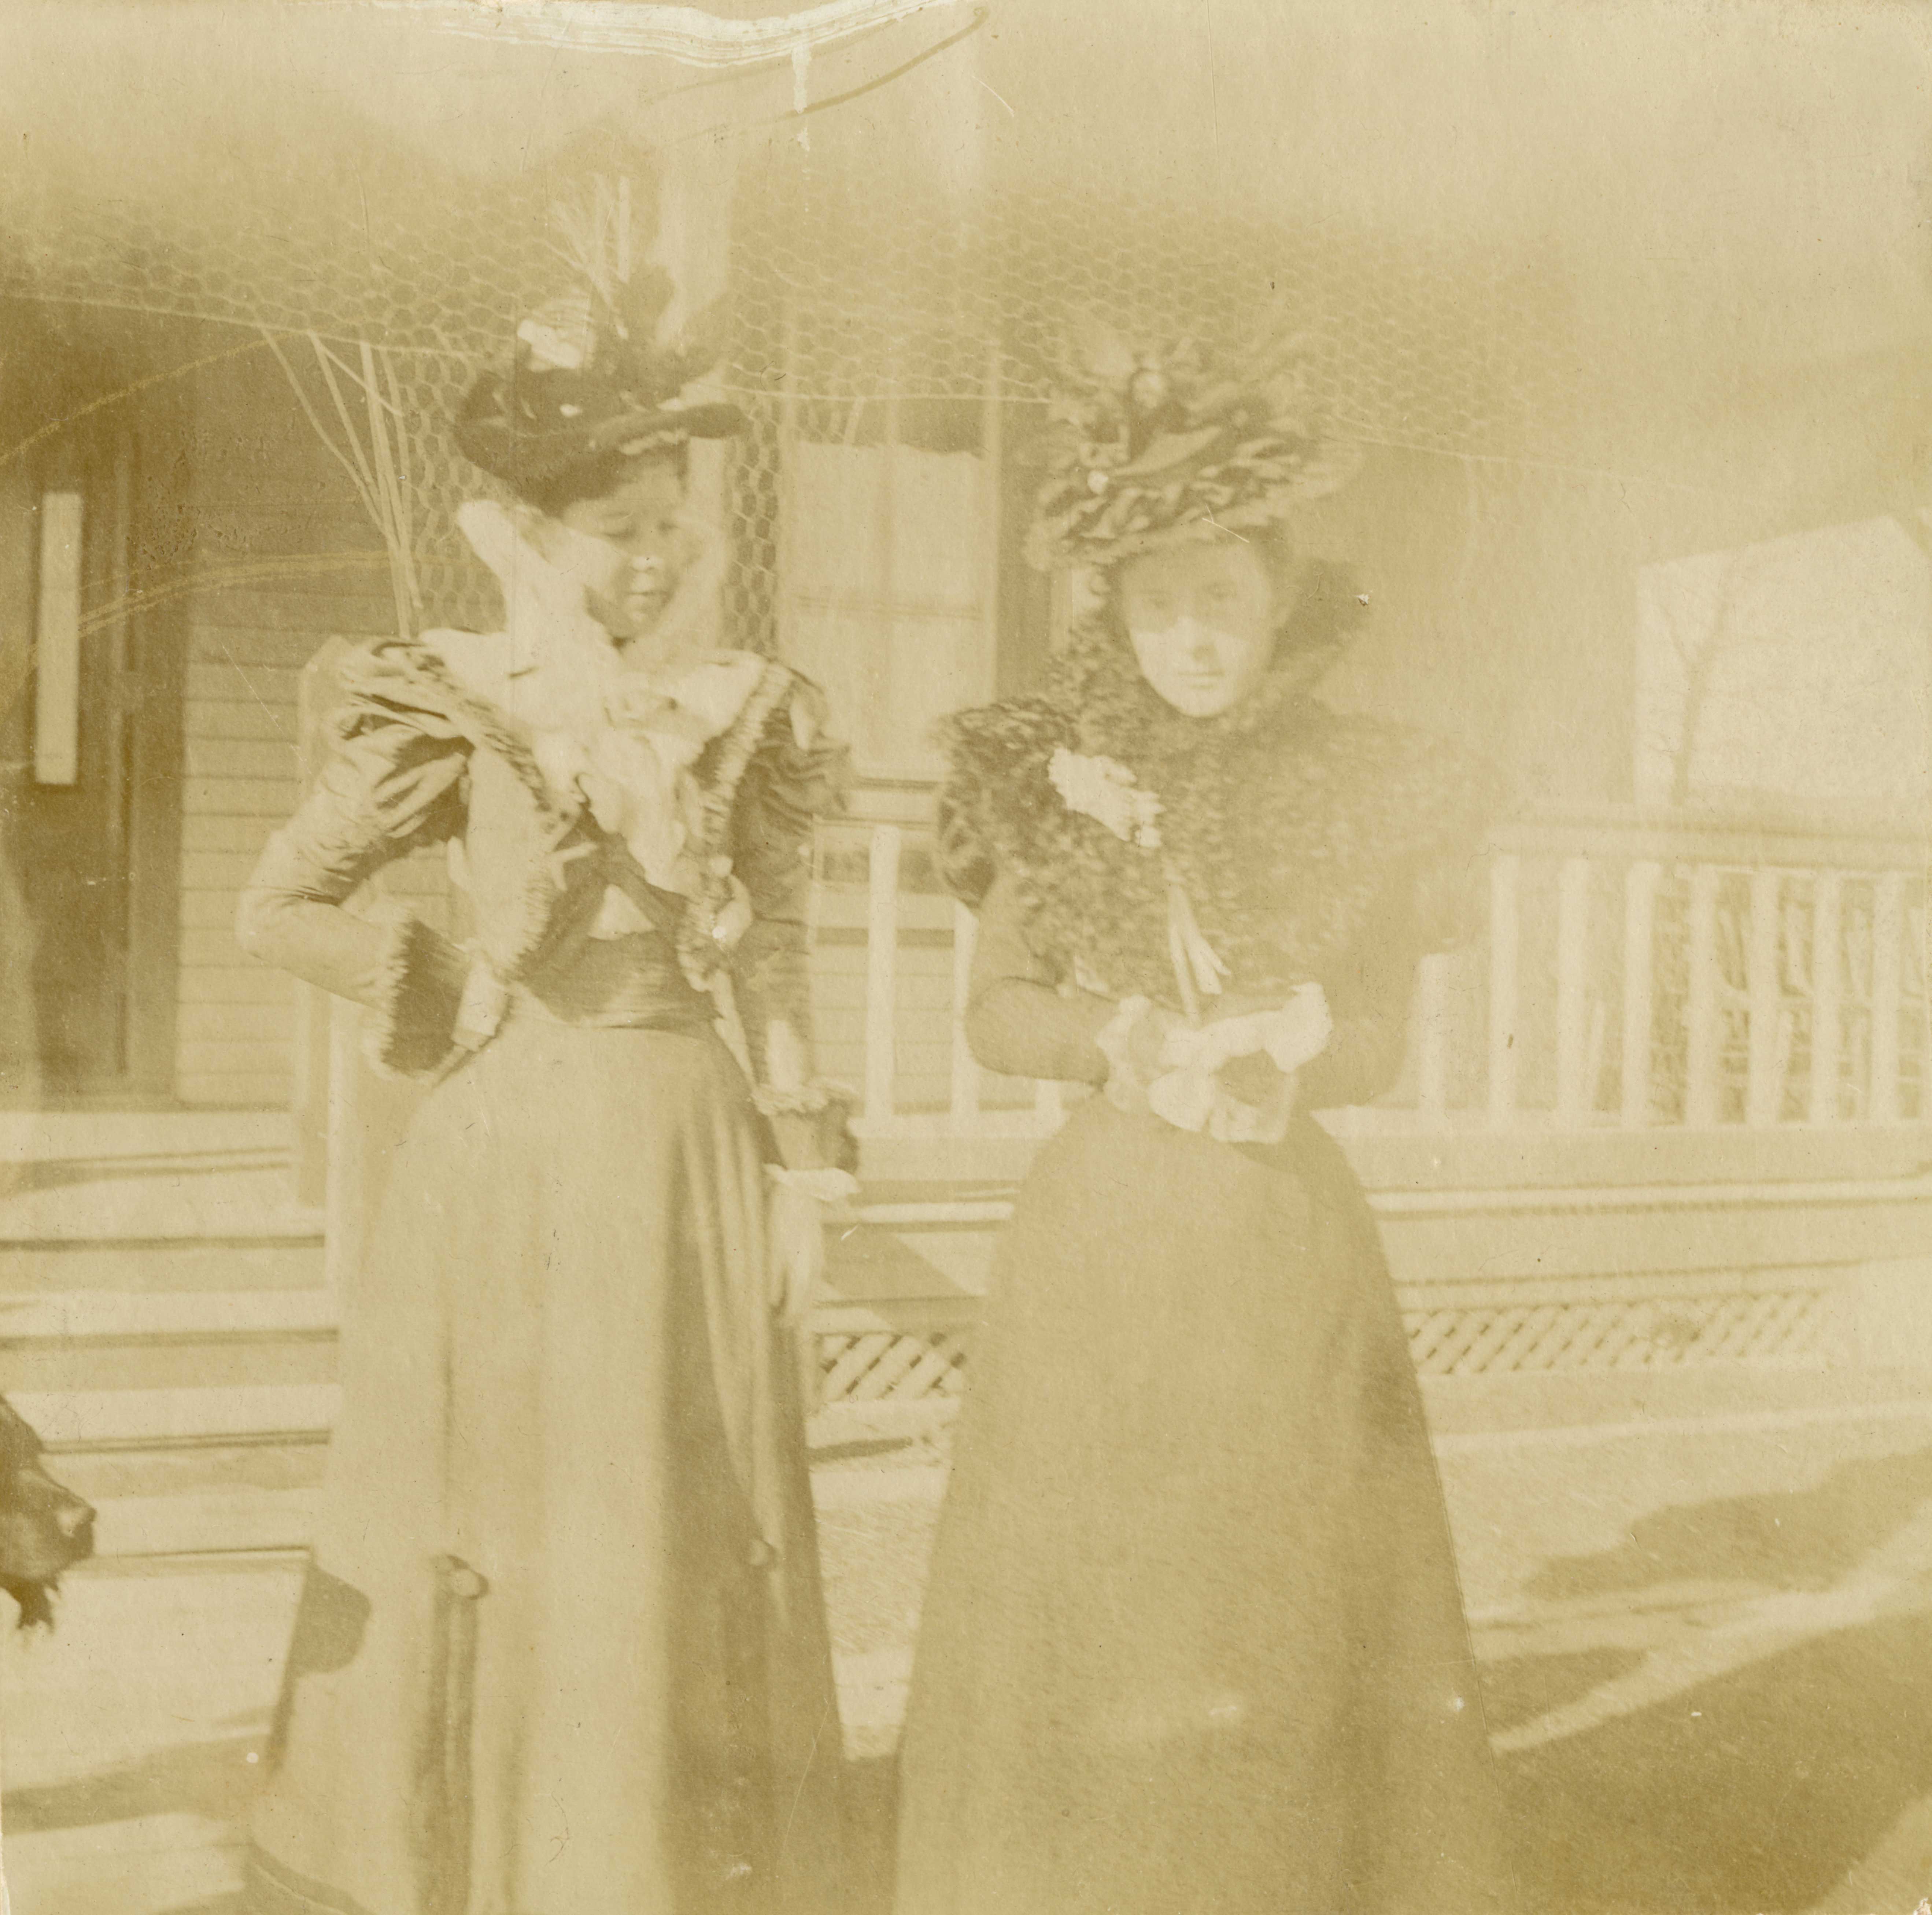 [Isabel Hamilton with one of her daughters in front of the family home at Fort Robinson]